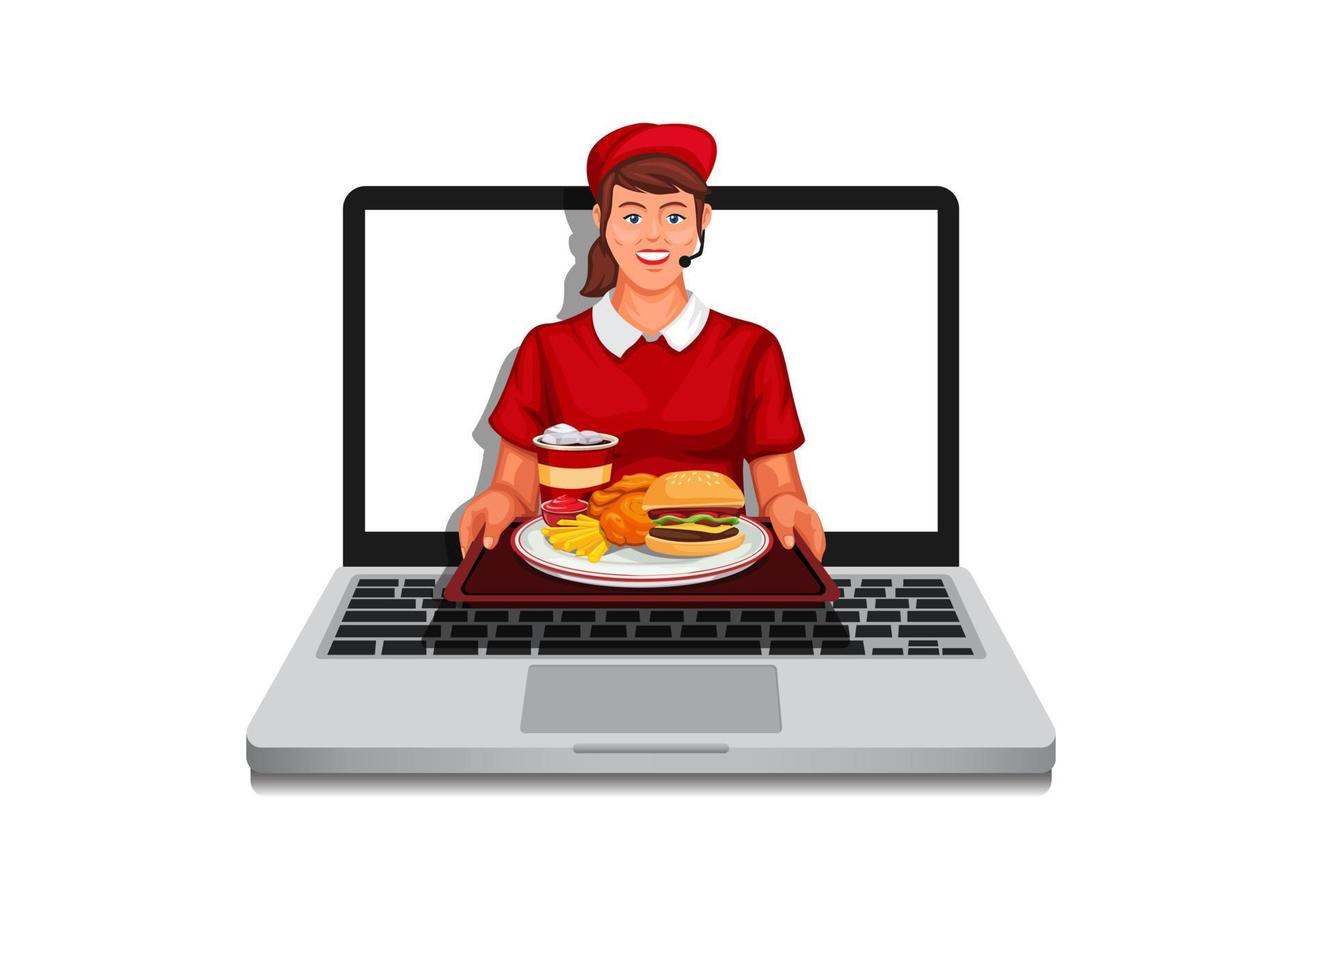 Girl fast food worker giving food from laptop. online order delivery symbol concept in cartoon illustration vector